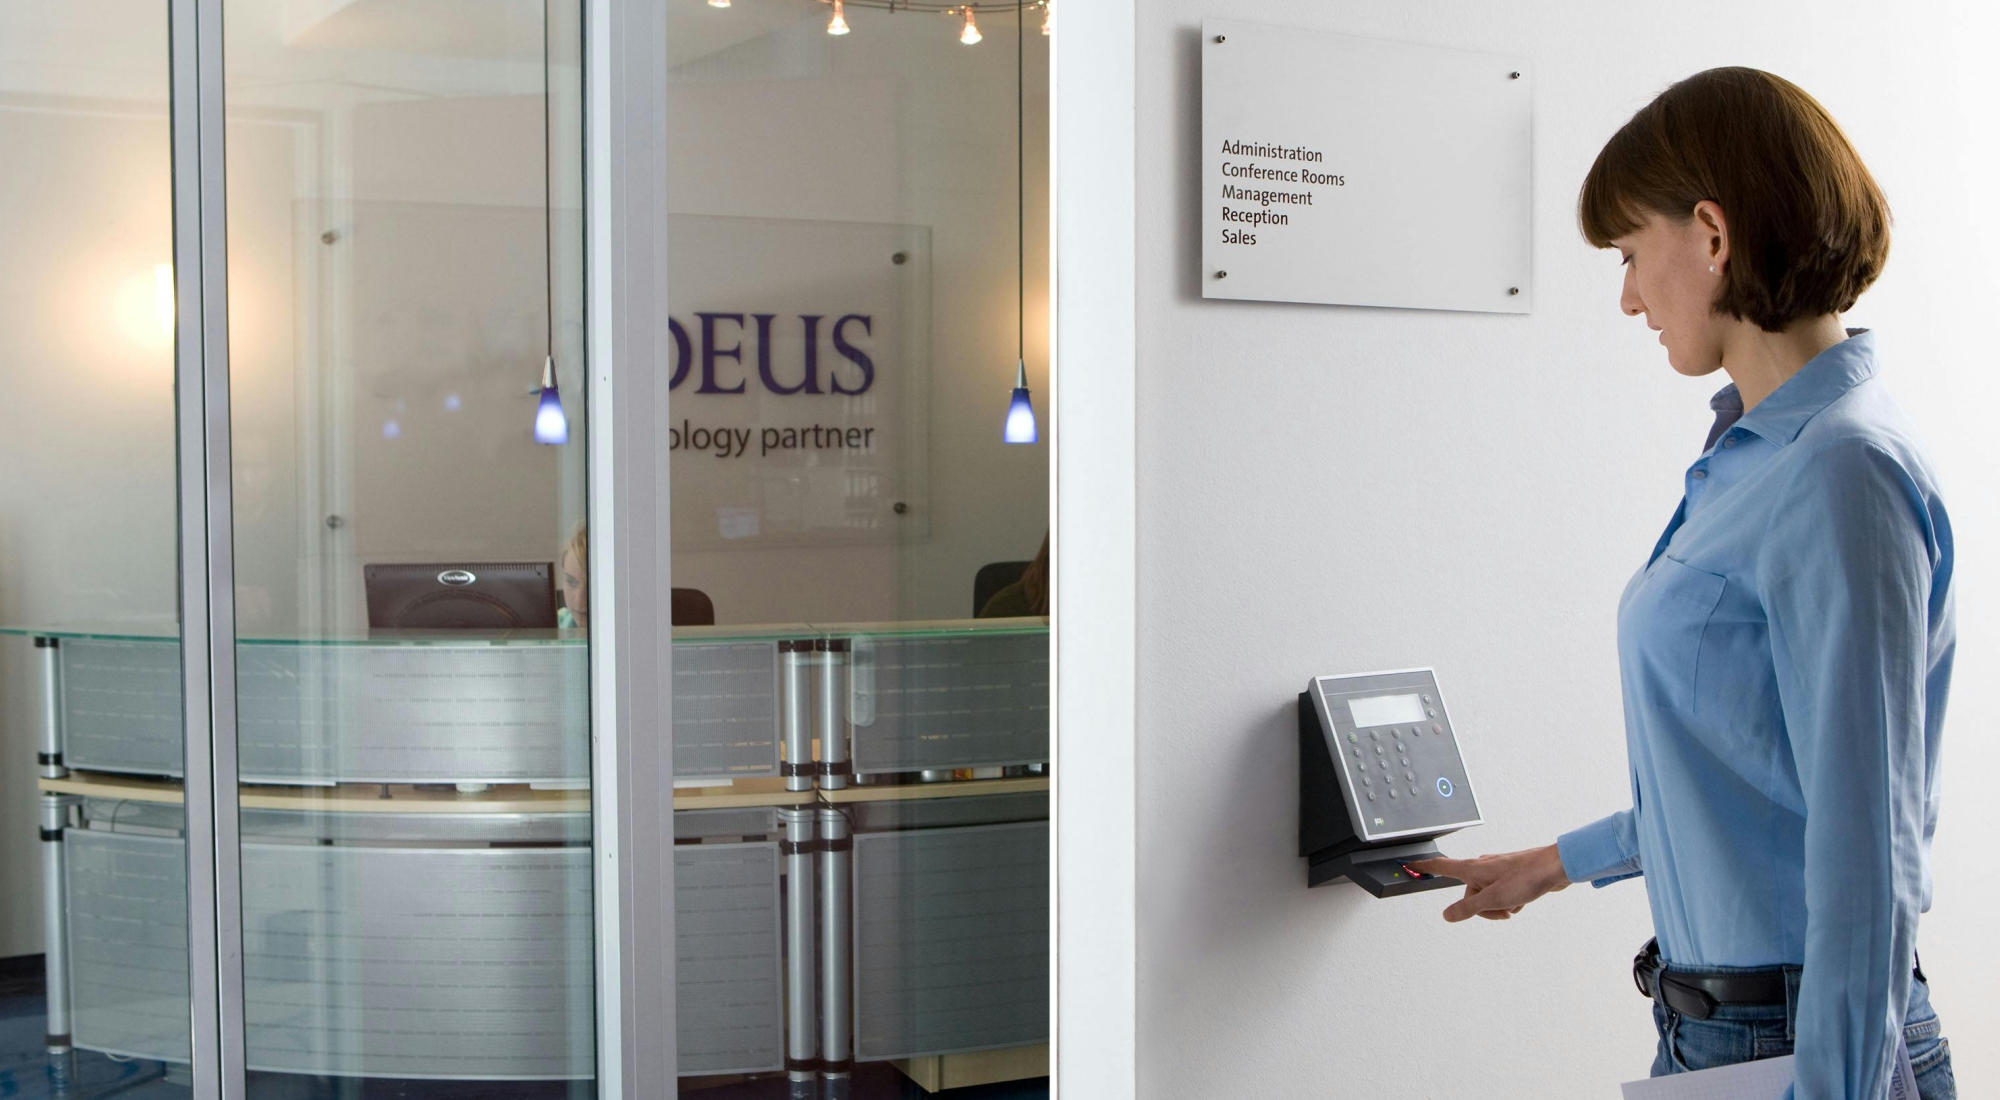 Access Control Systems For Business